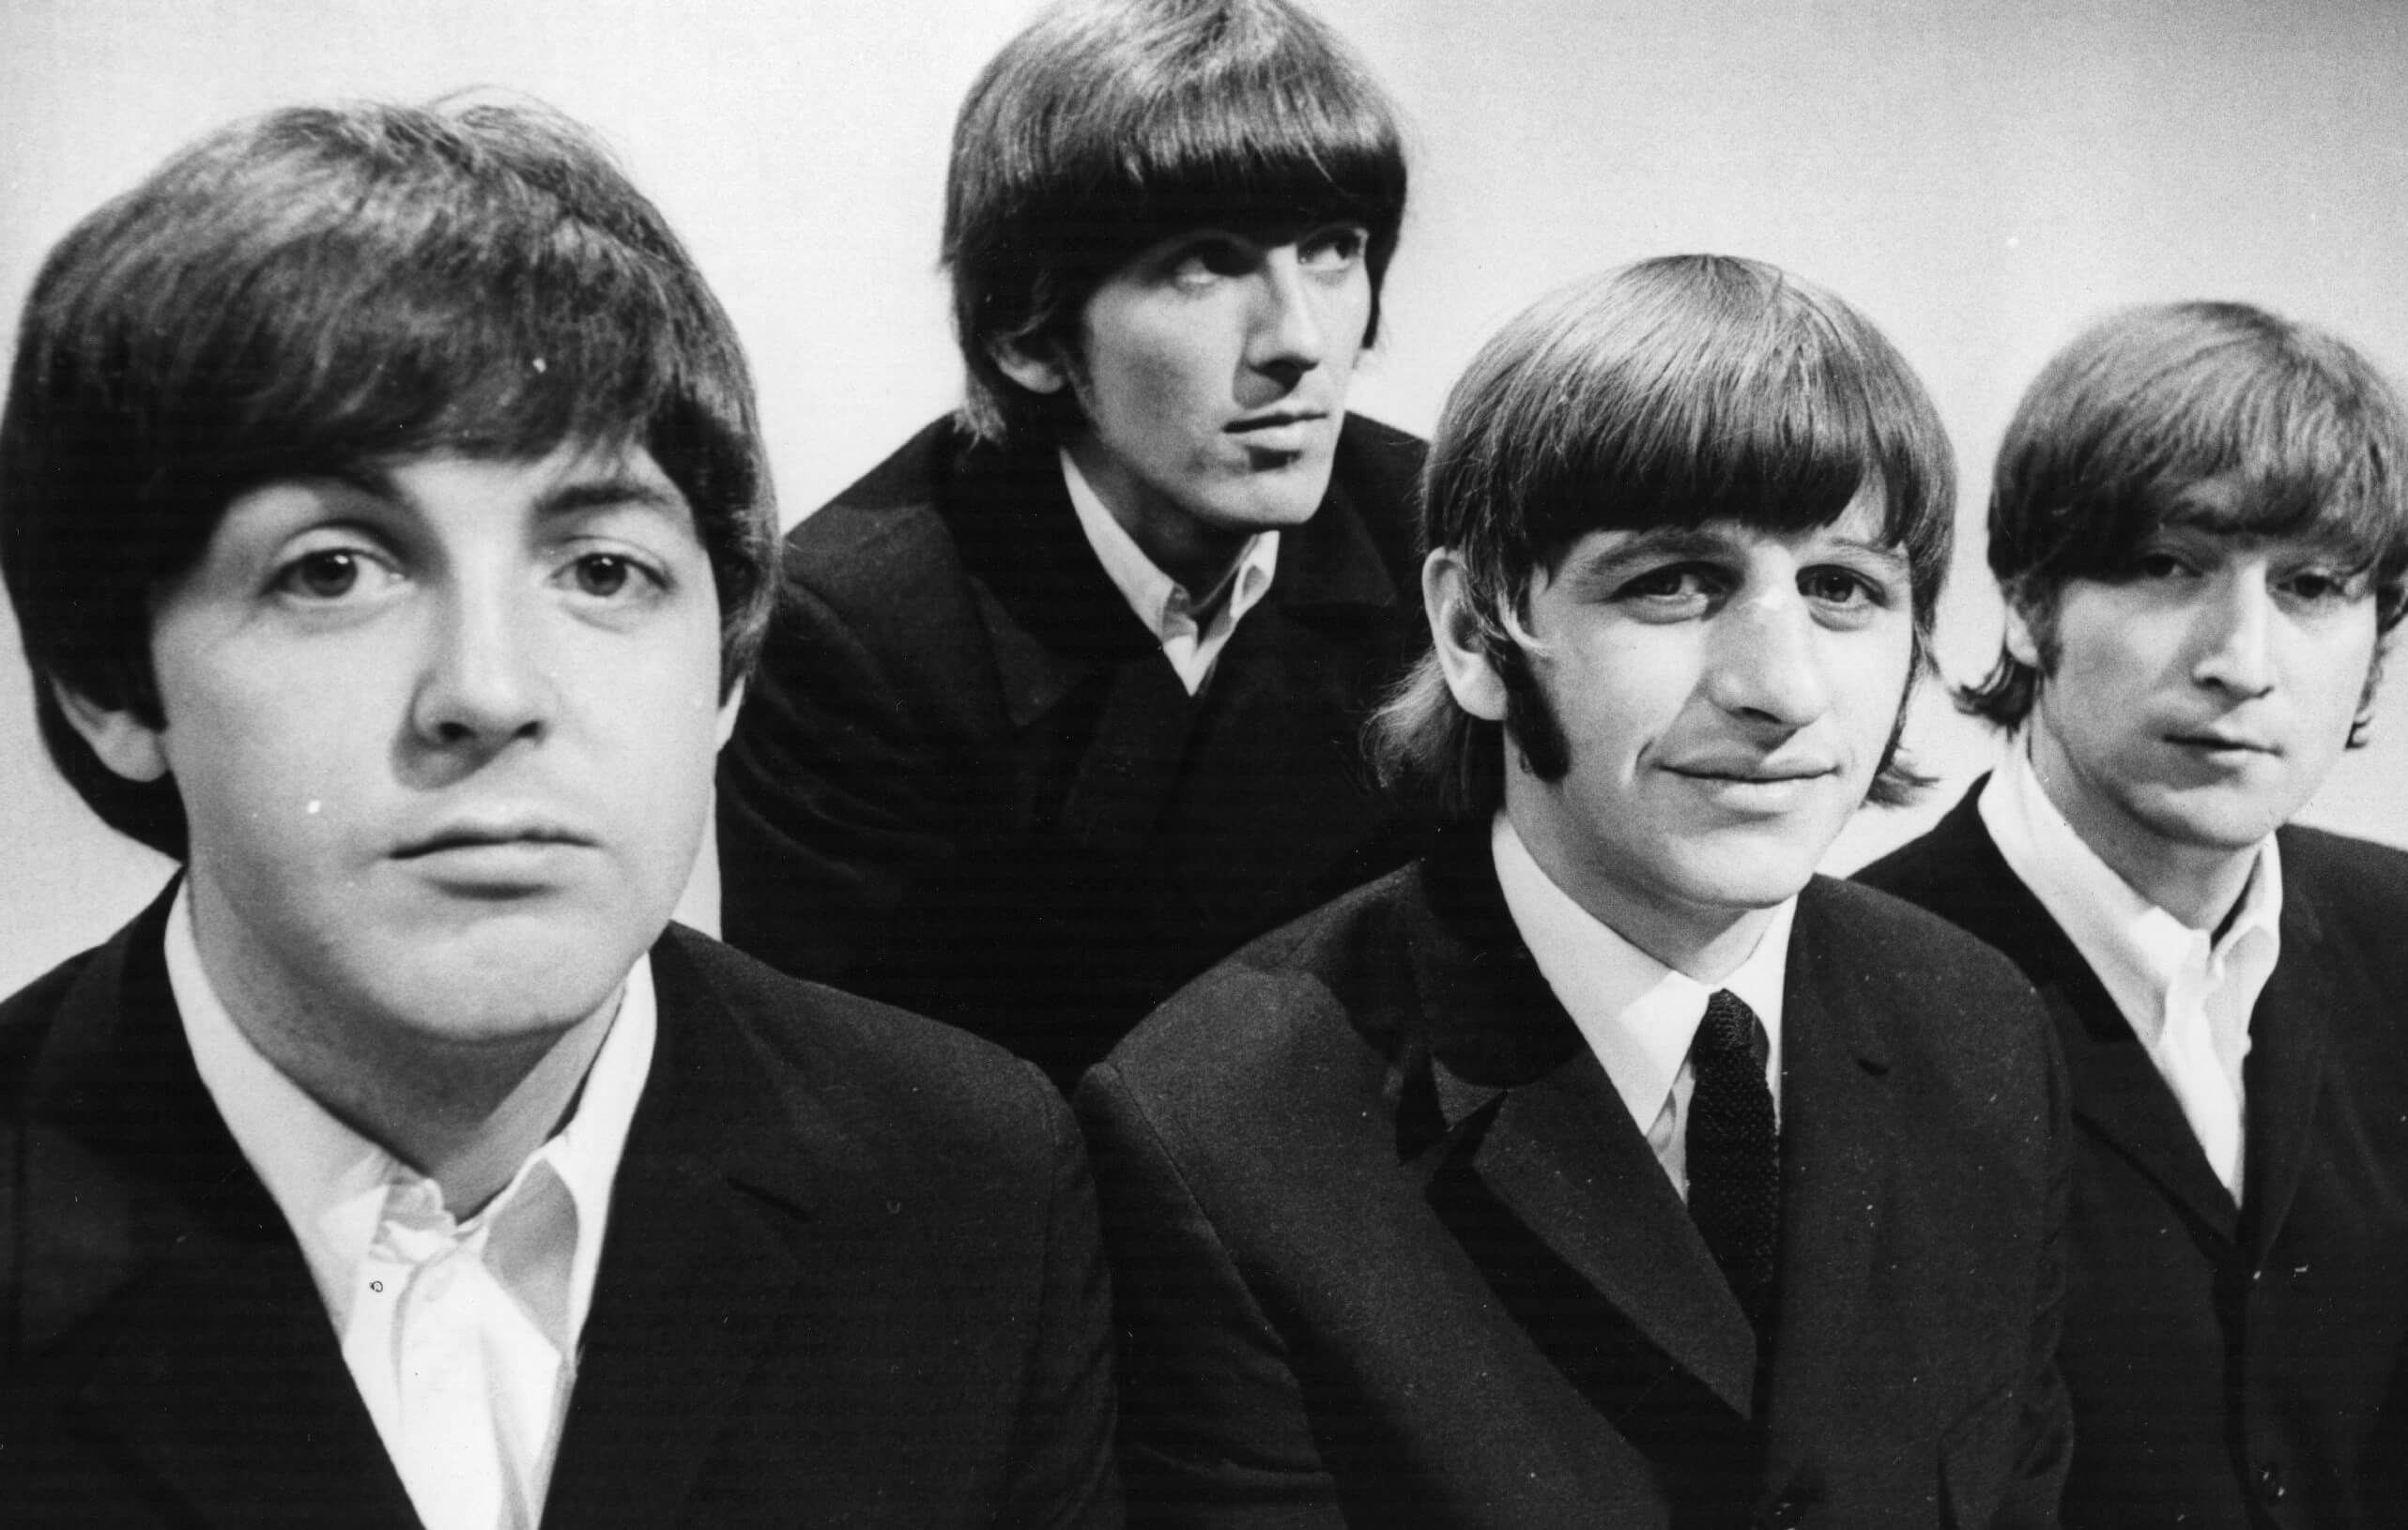 "Ticket to Ride" era Beatles in black-and-white